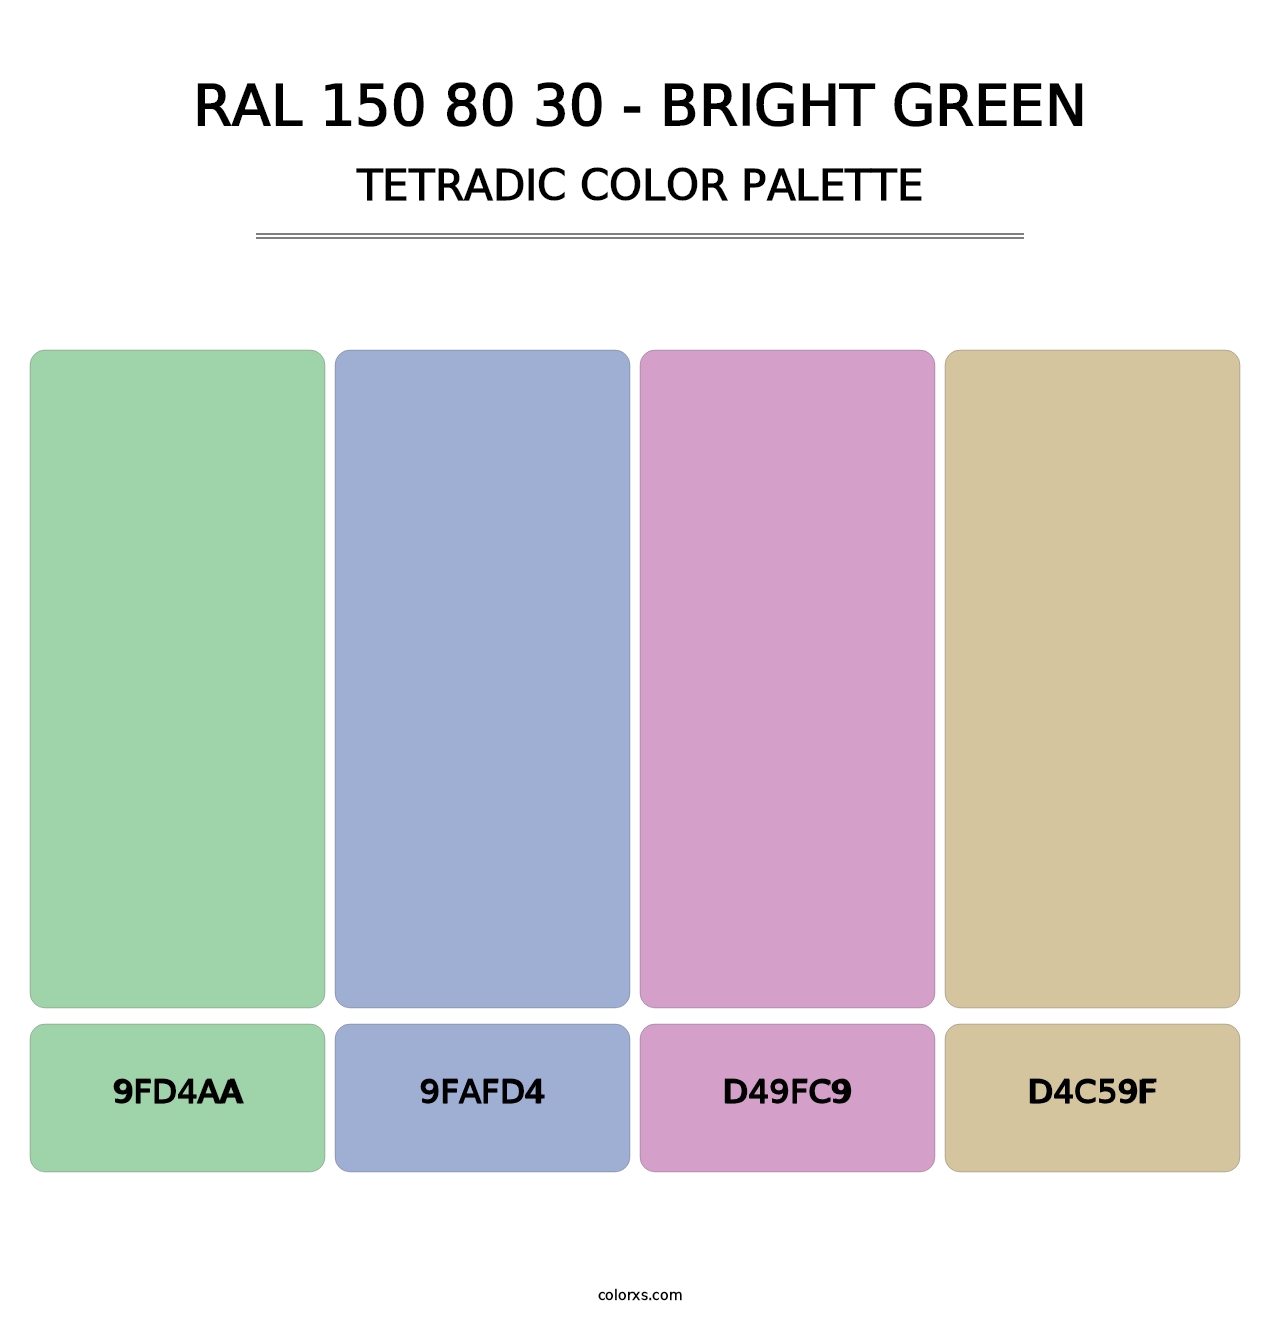 RAL 150 80 30 - Bright Green - Tetradic Color Palette